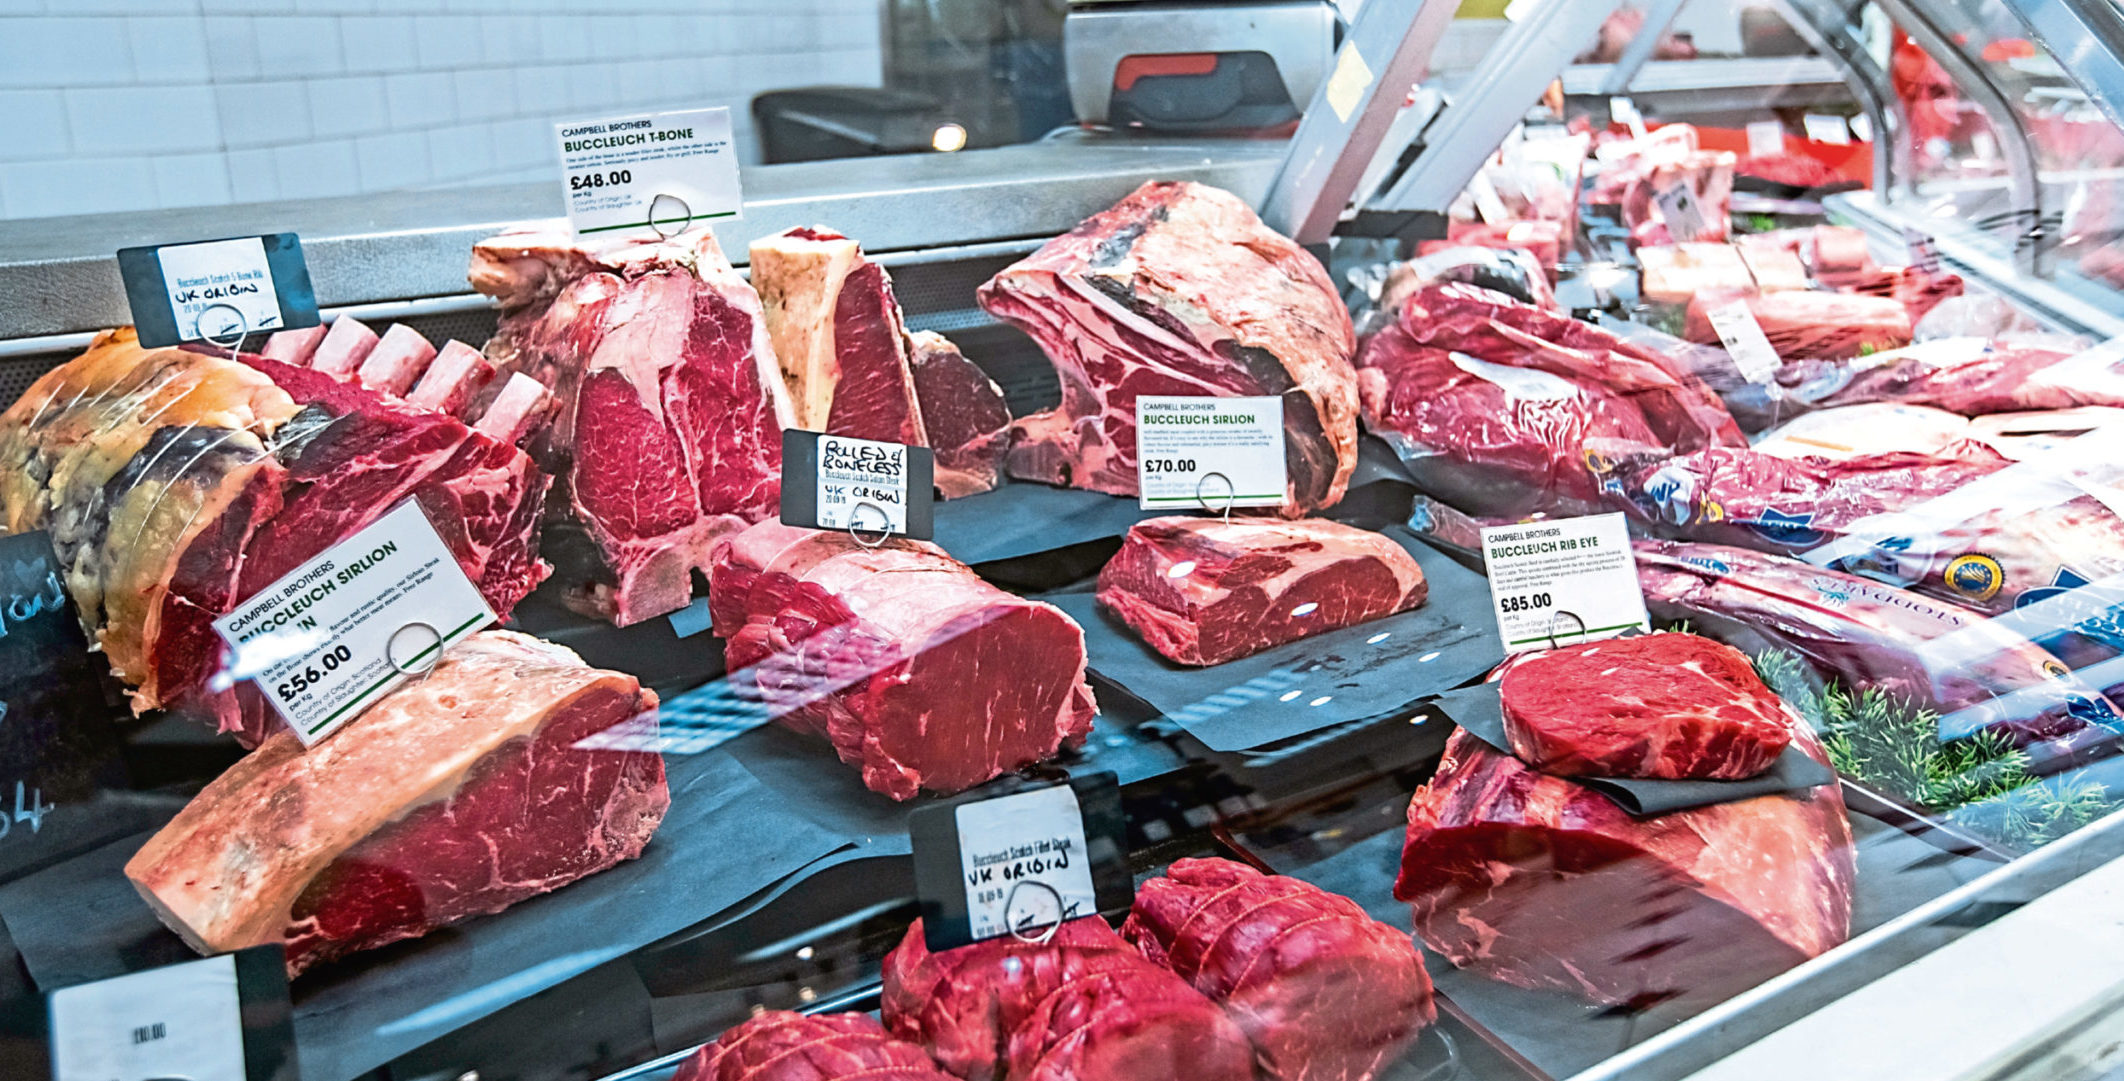 Cheap food imports could undermine UK food production, particularly the meat sector.